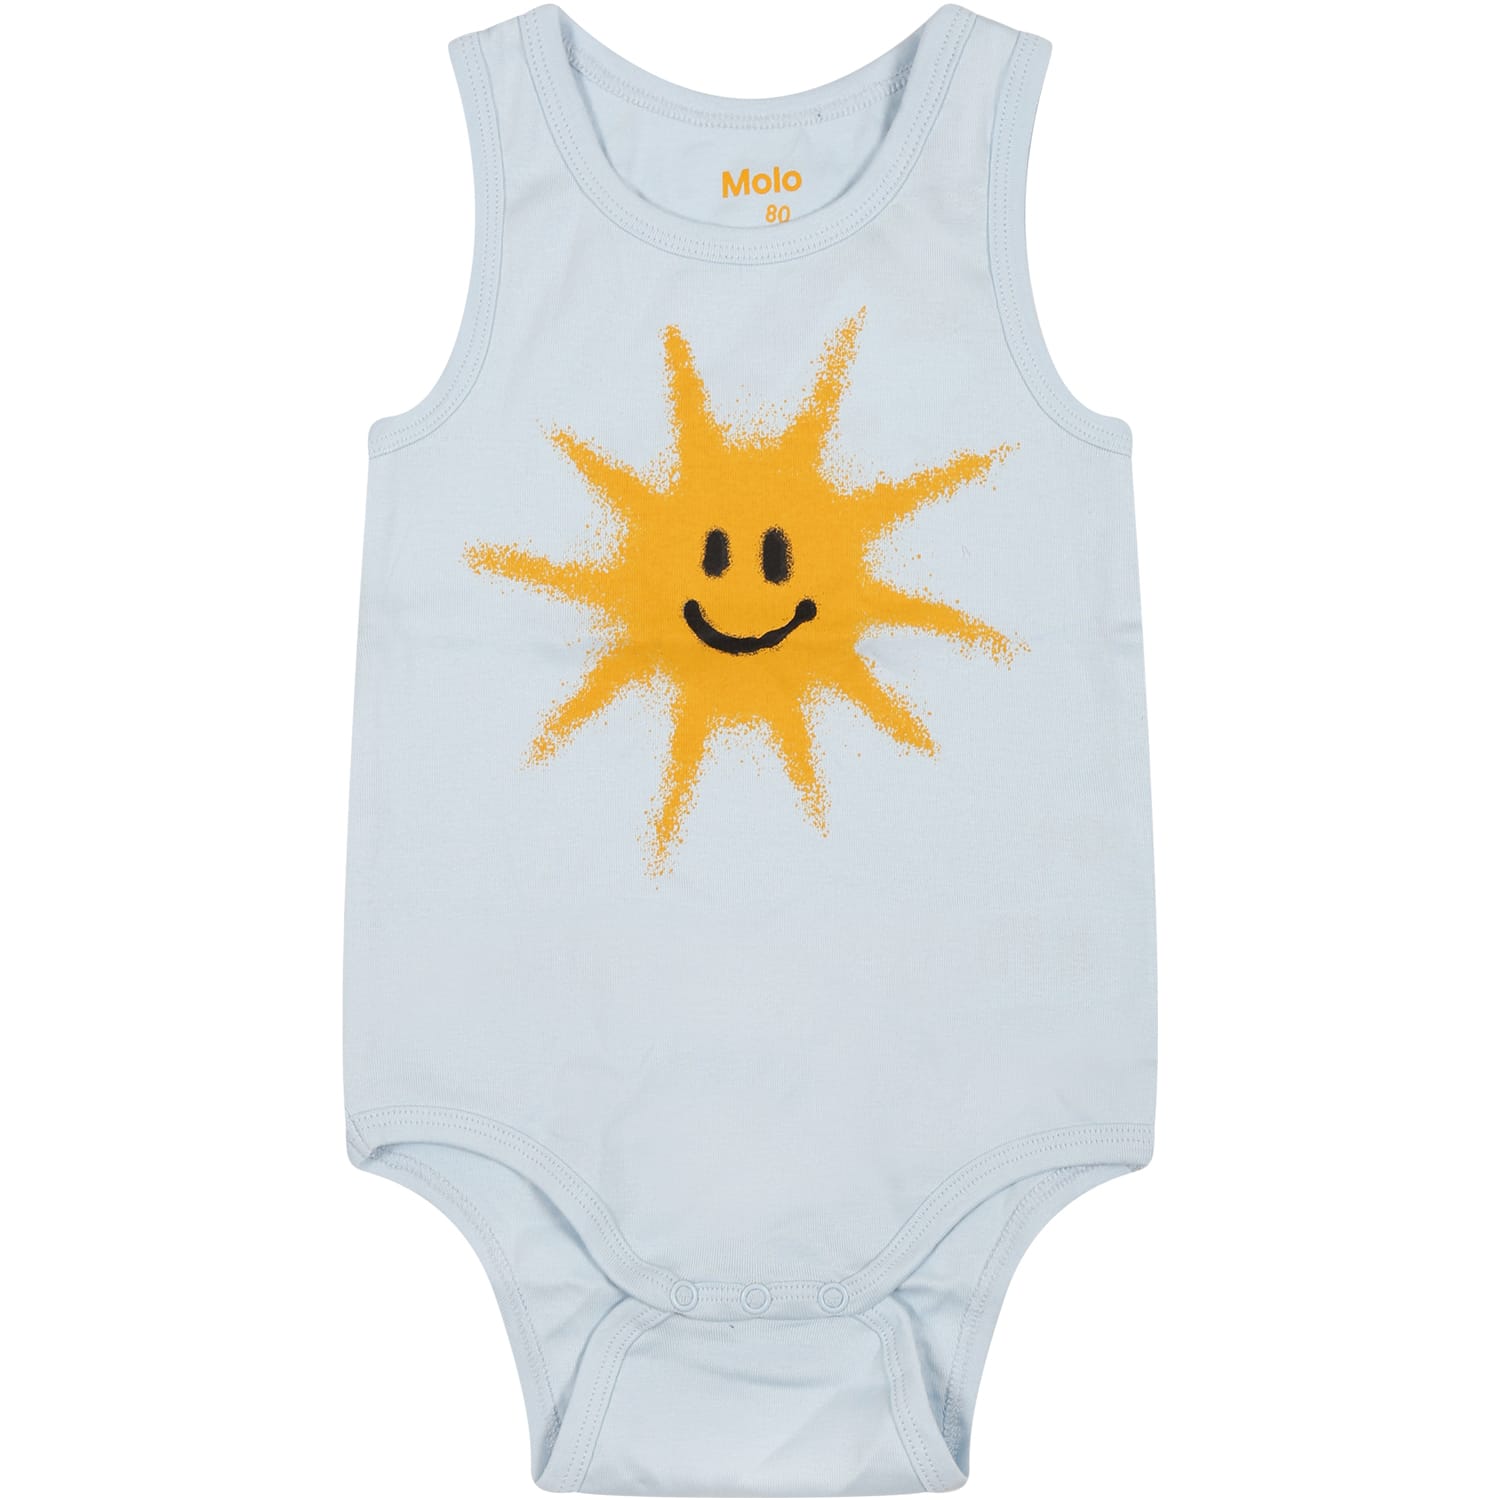 MOLO LIGHT BLUE BODY FOR BABY KIDS WITH SUN PRINT